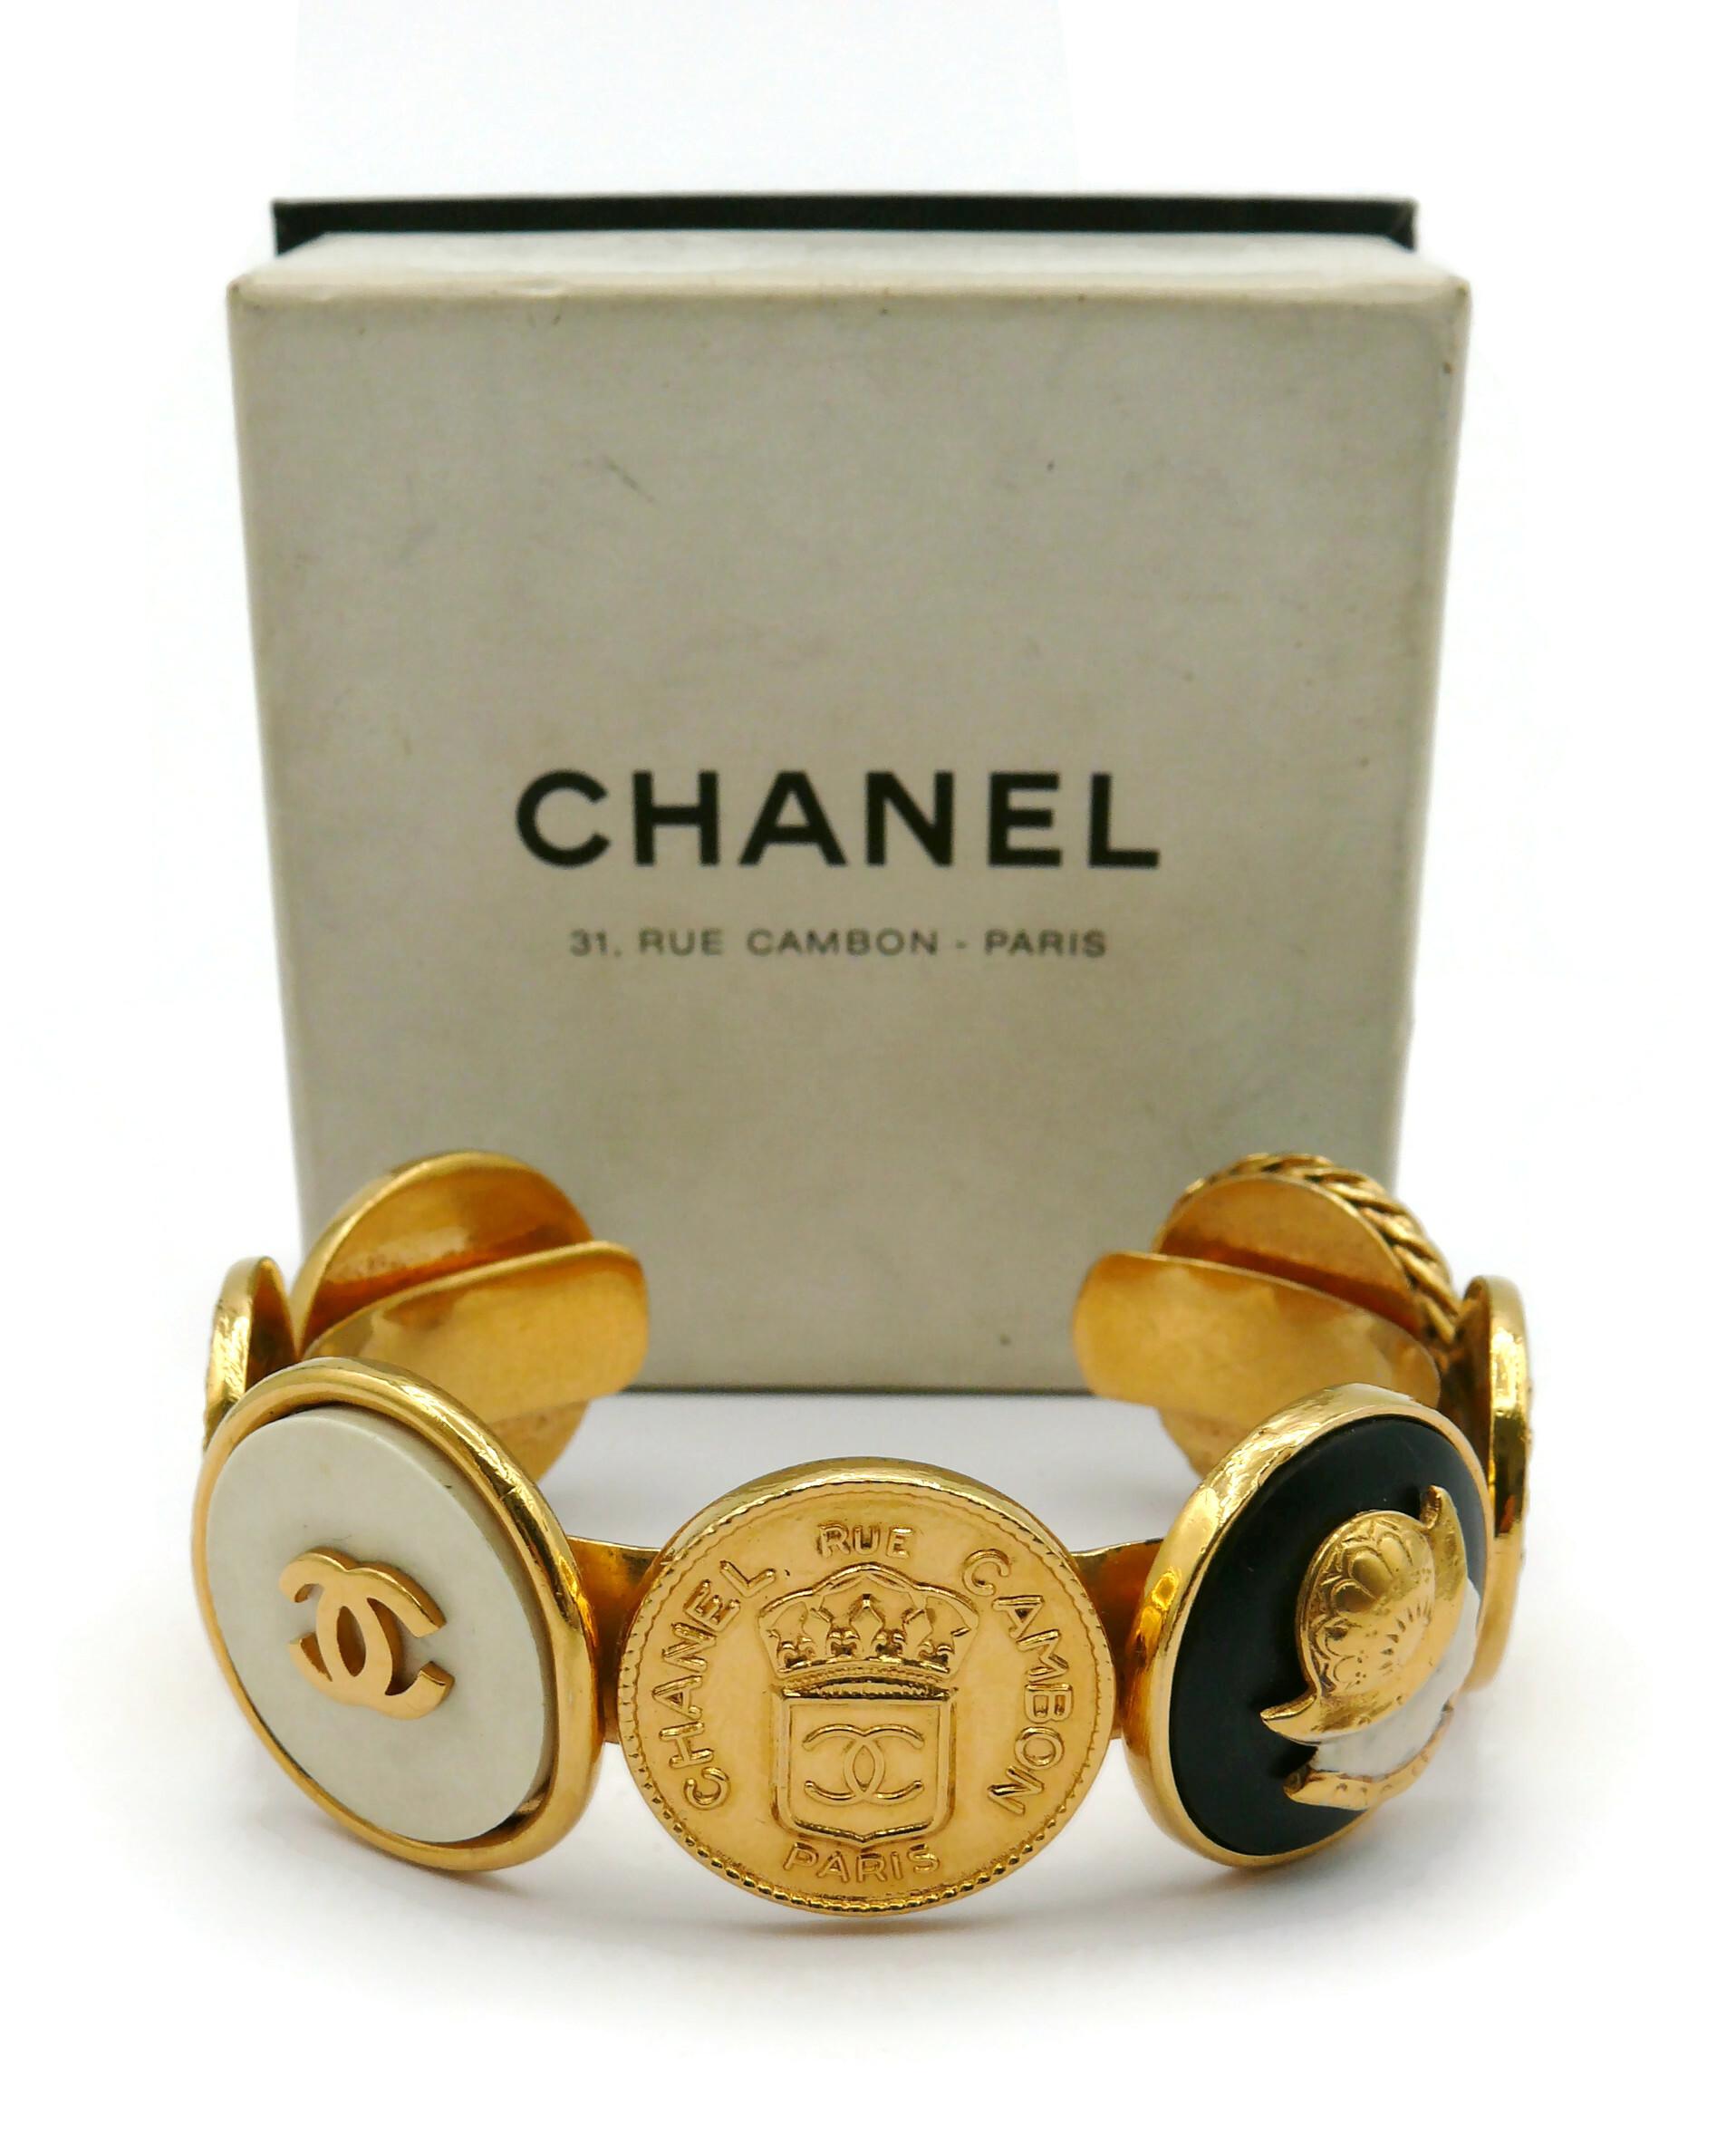 CHANEL vintage iconic gold tone bangle bracelet featuring coins : Crowned CC CHANEL 31 Rue Cambon Paris, Elephant, Helmeted Guards, CC logos and a Lady profile.

Embossed CHANEL.

Indicative measurements : inner measurements approx. 5.9 cm x 4.6 cm